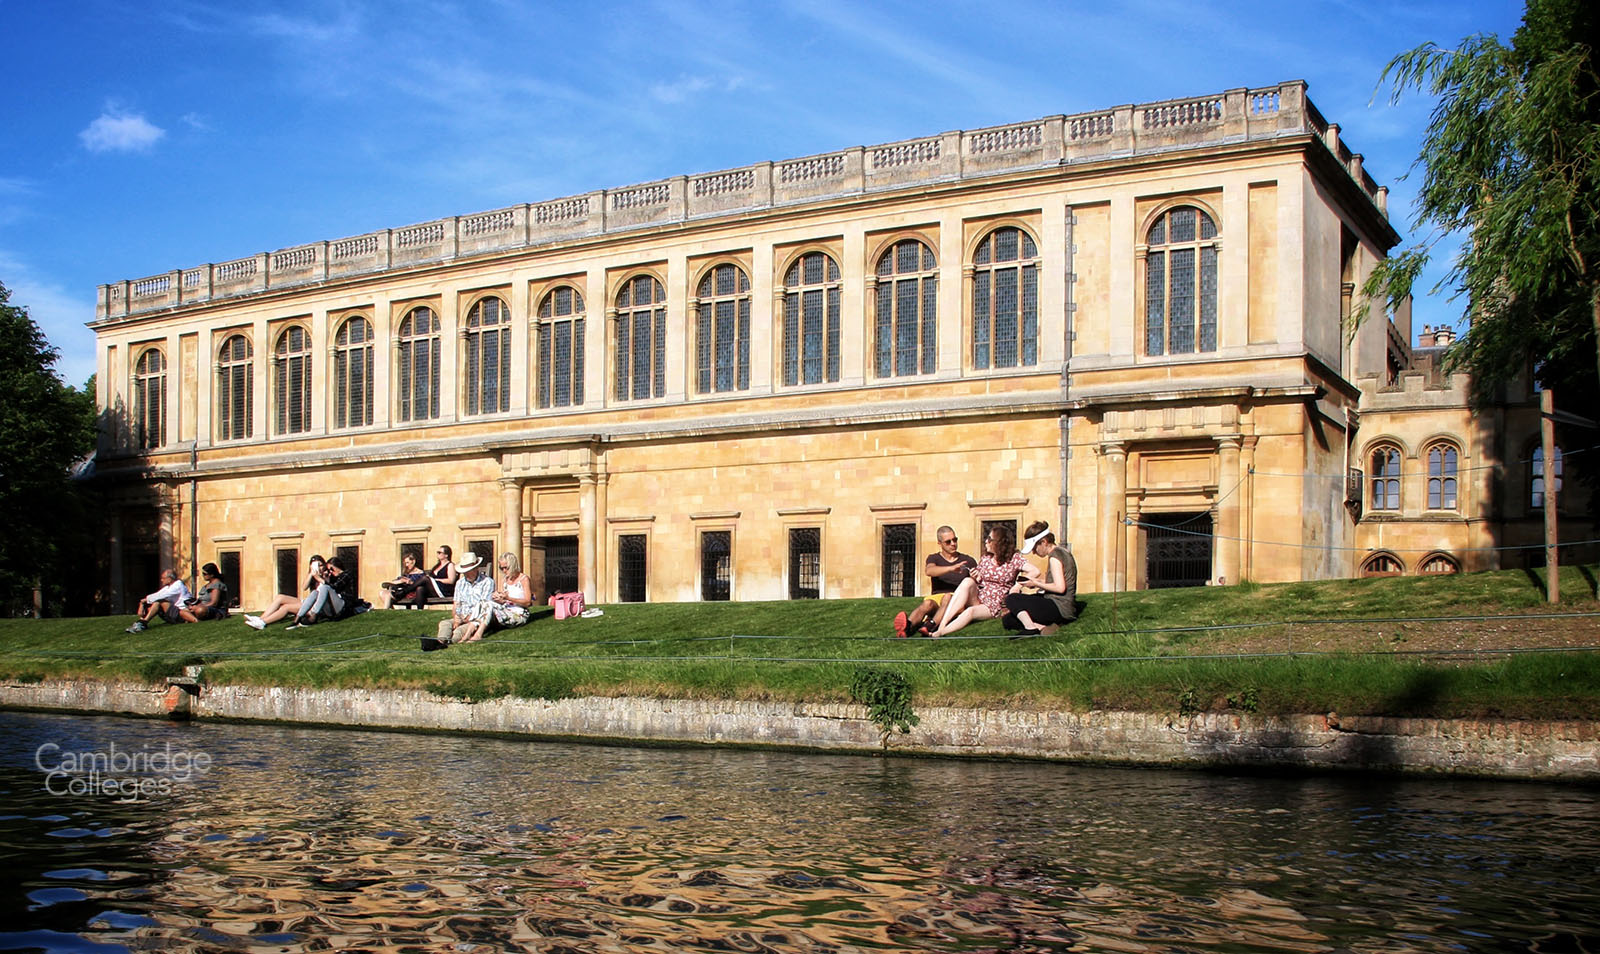 People sit on the bank of the river Cam outside the Wren Library on a summer day